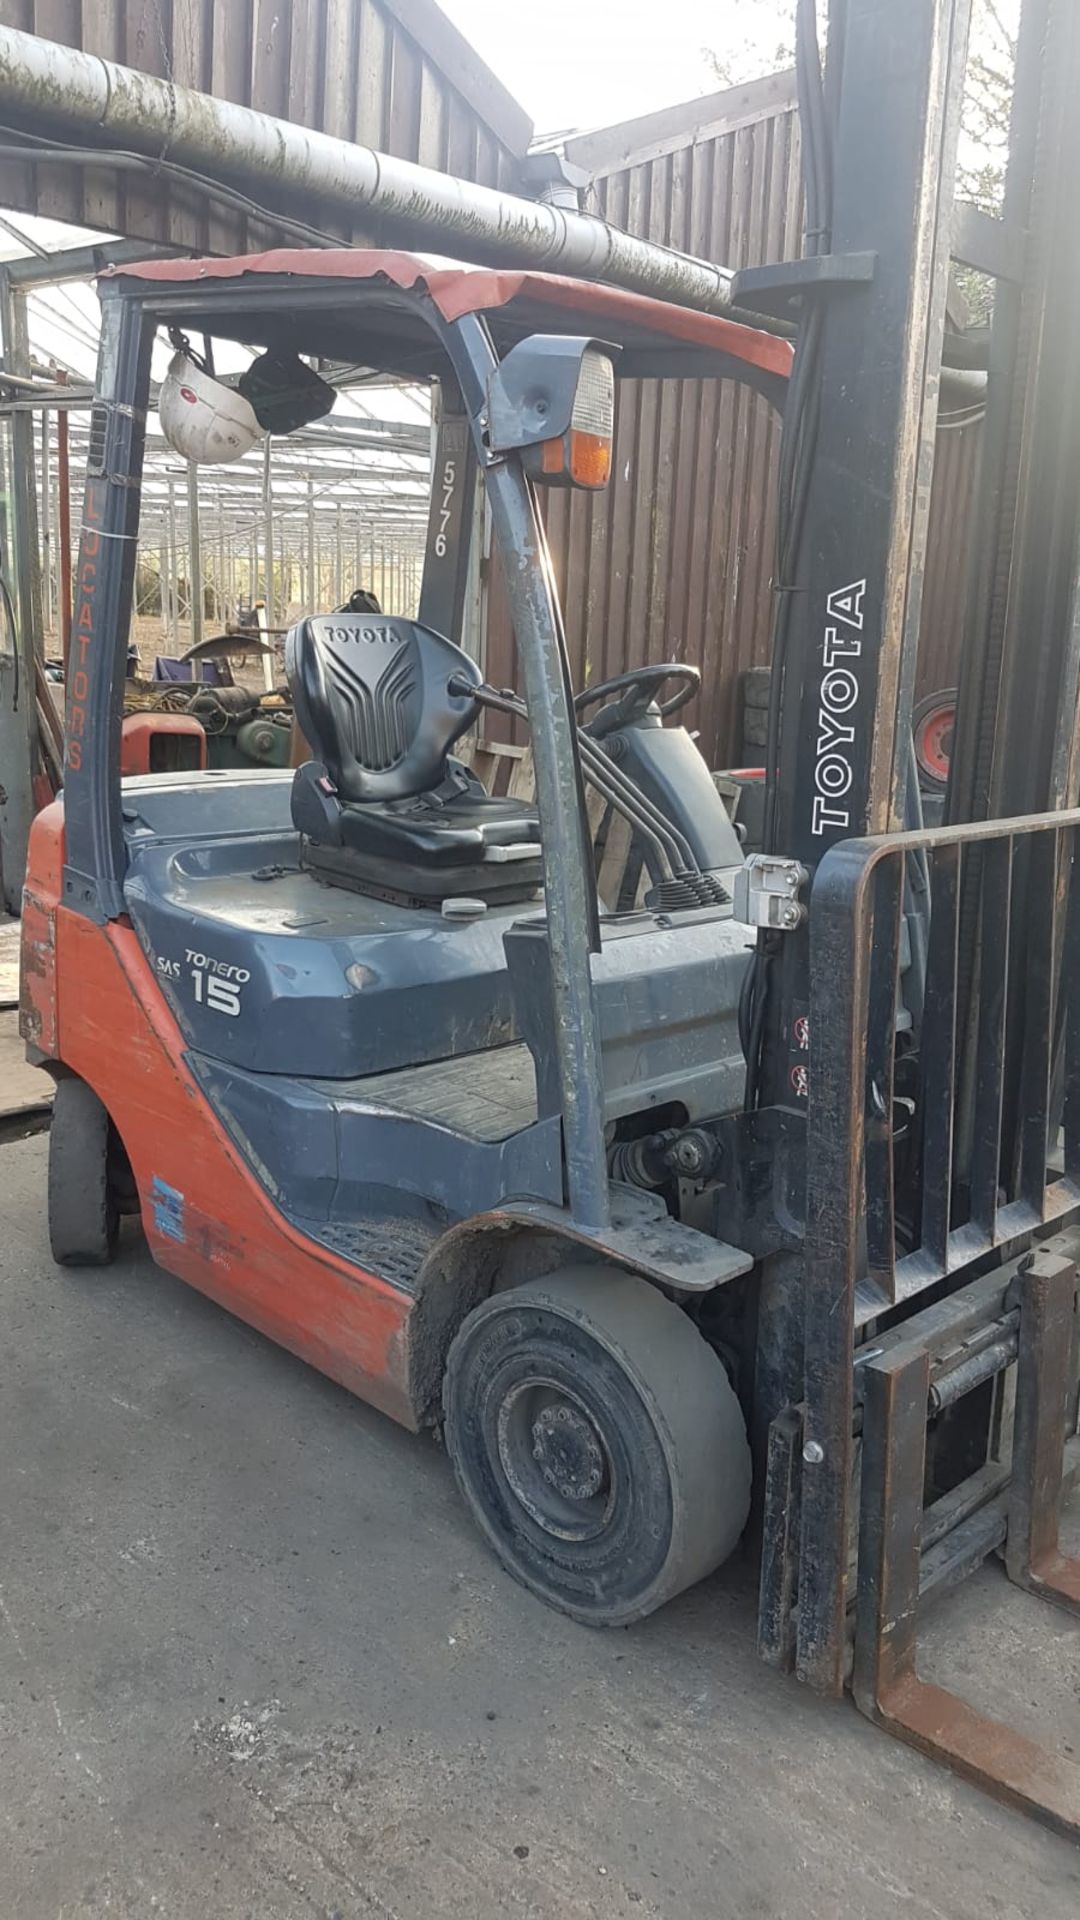 TOYOTA 8FD15 1.5TONNE DIESEL FORKLIFT, YEAR 2007 WITH SIDE SHIFT SN;8FDF18-10277 ......LOCATED IN